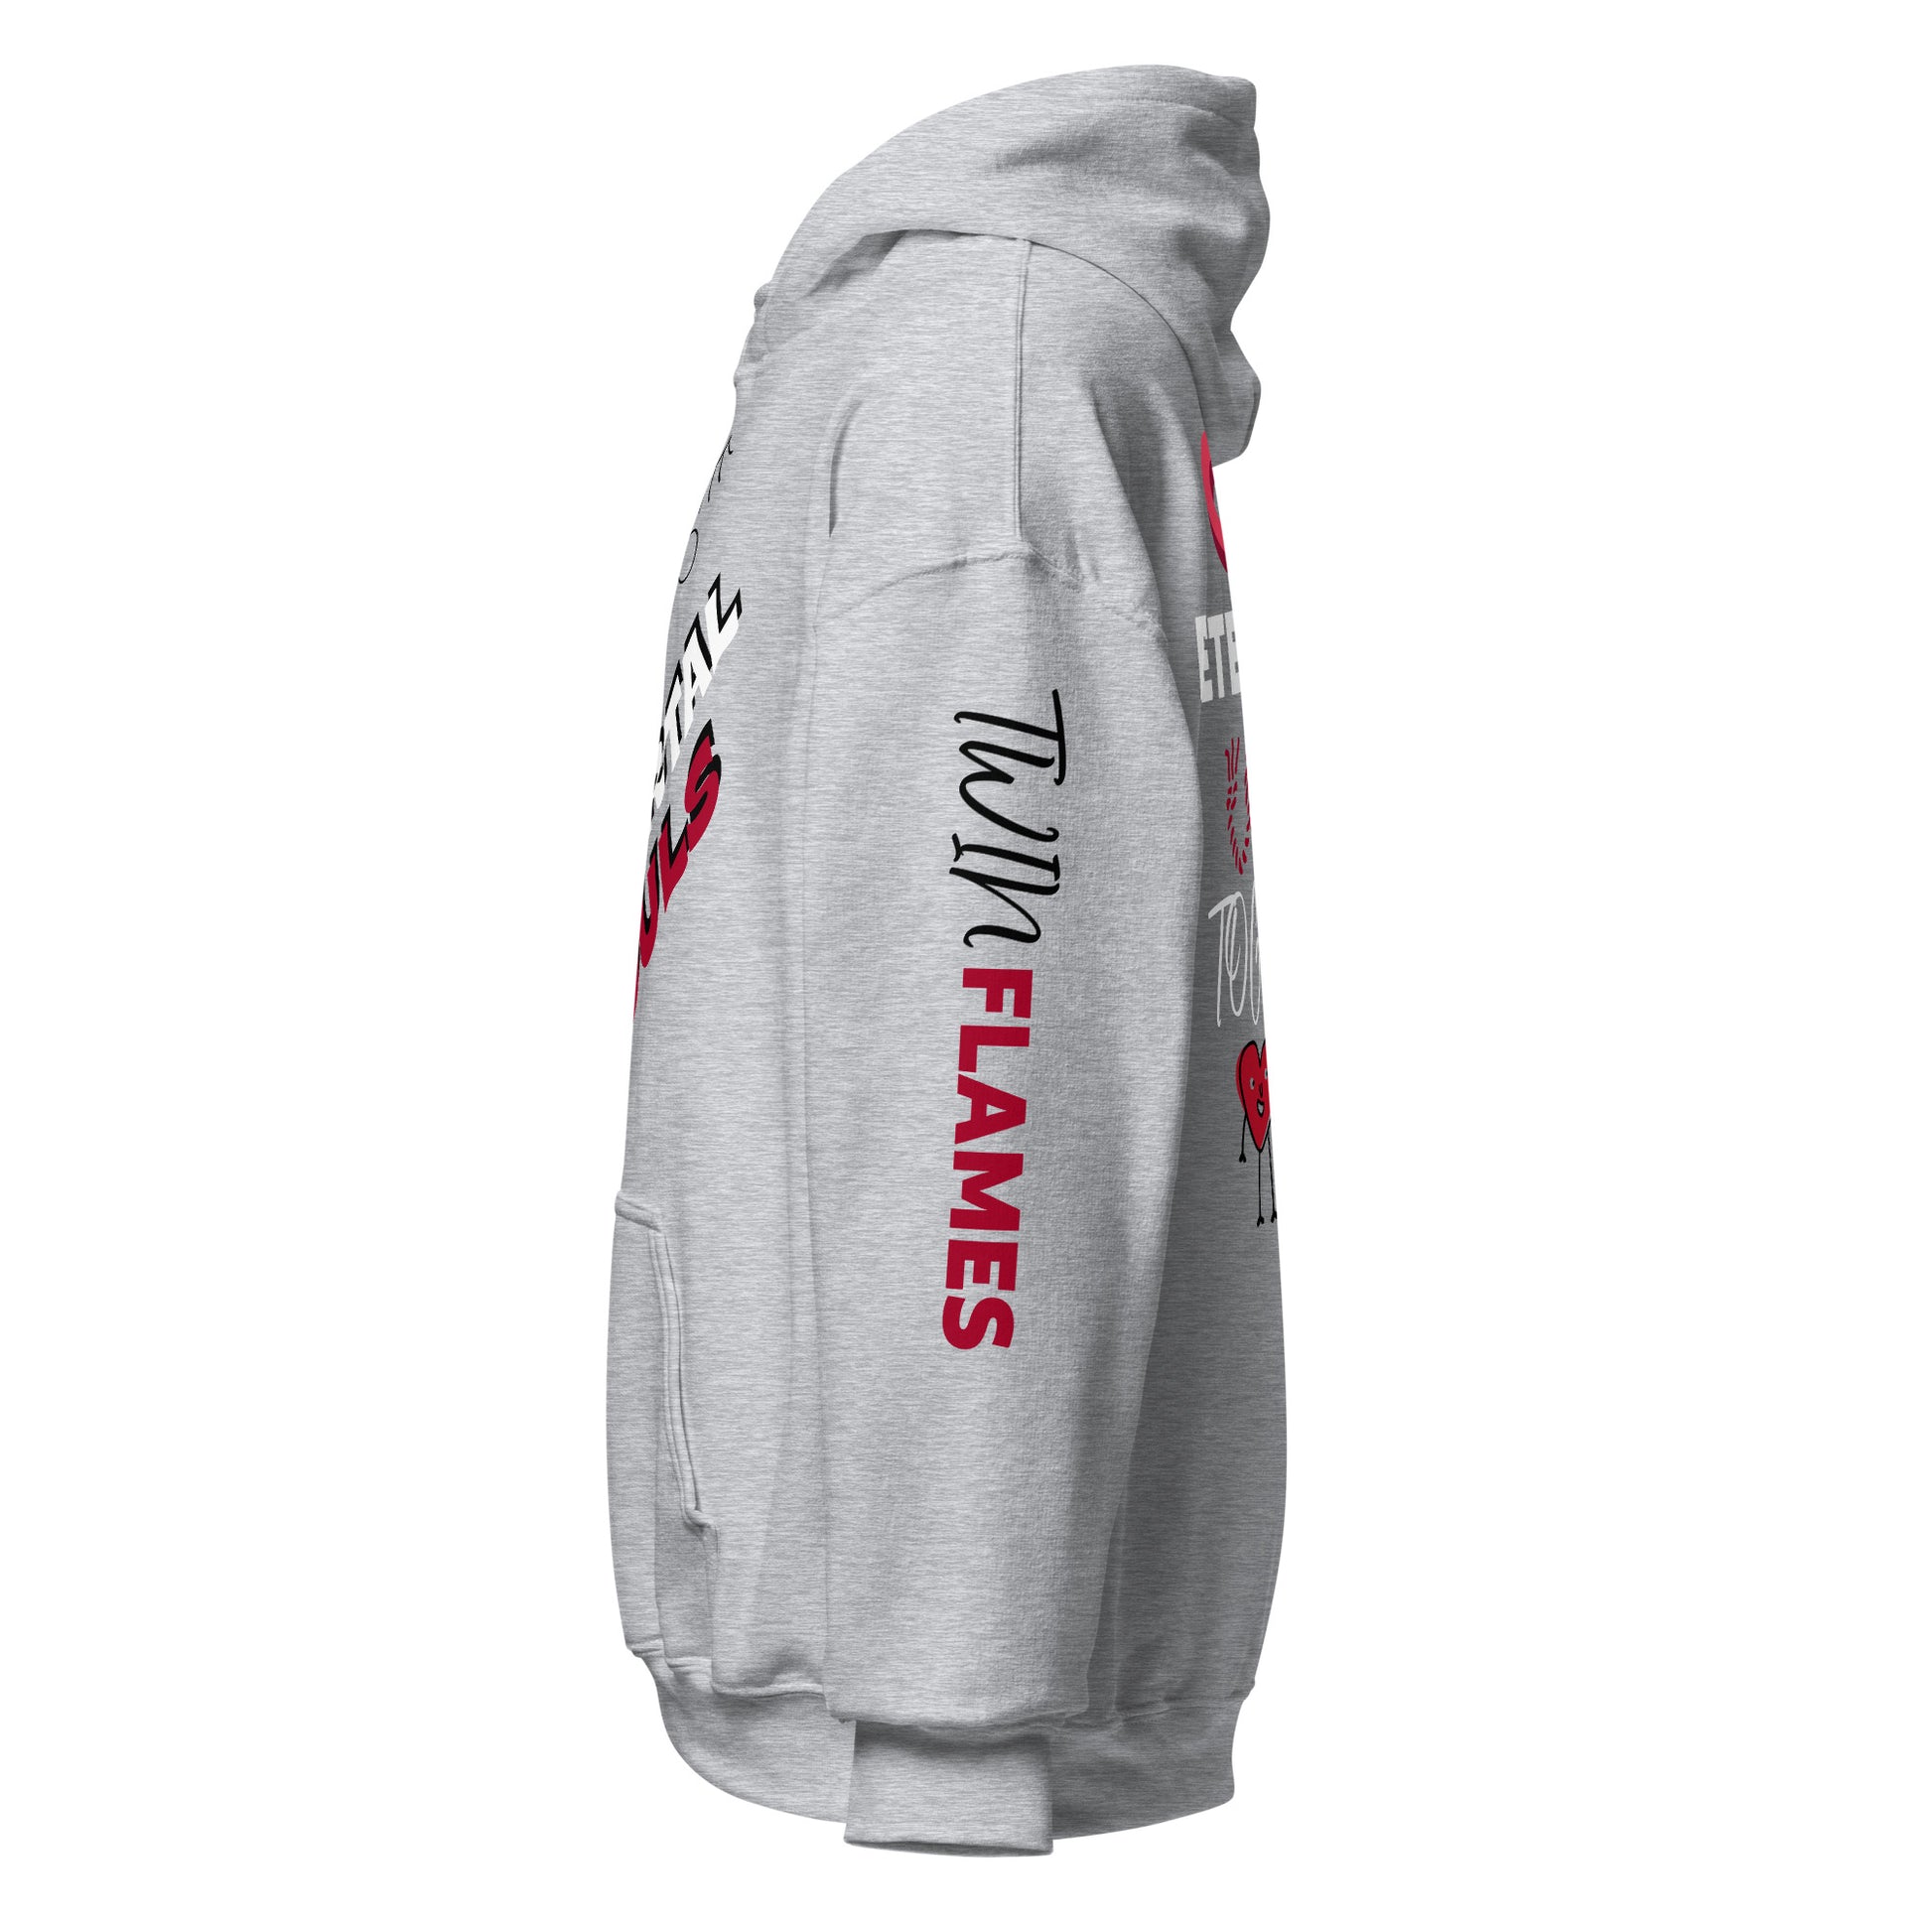 Gildan 18500 unisex hoodies. Sport gray graphic hoodies with logo and text on front, text on back, text on left sleeve, and text on right sleeve (left side view shown). Black and red "Twin Flames" tagline on left arm with 1 × 1 inch athletic rib-knit cuff (shown). Air-jet spun yarn made from 50% preshrunk cotton and 50% polyester, for softness and reduced pilling. Sizes Small, Medium, Large, Extra Large, 2X, 3X, 4X, and 5X. JAMILLIAH'S WISDOM IS TIMELESS SHOP - wisdomistimeless.com.